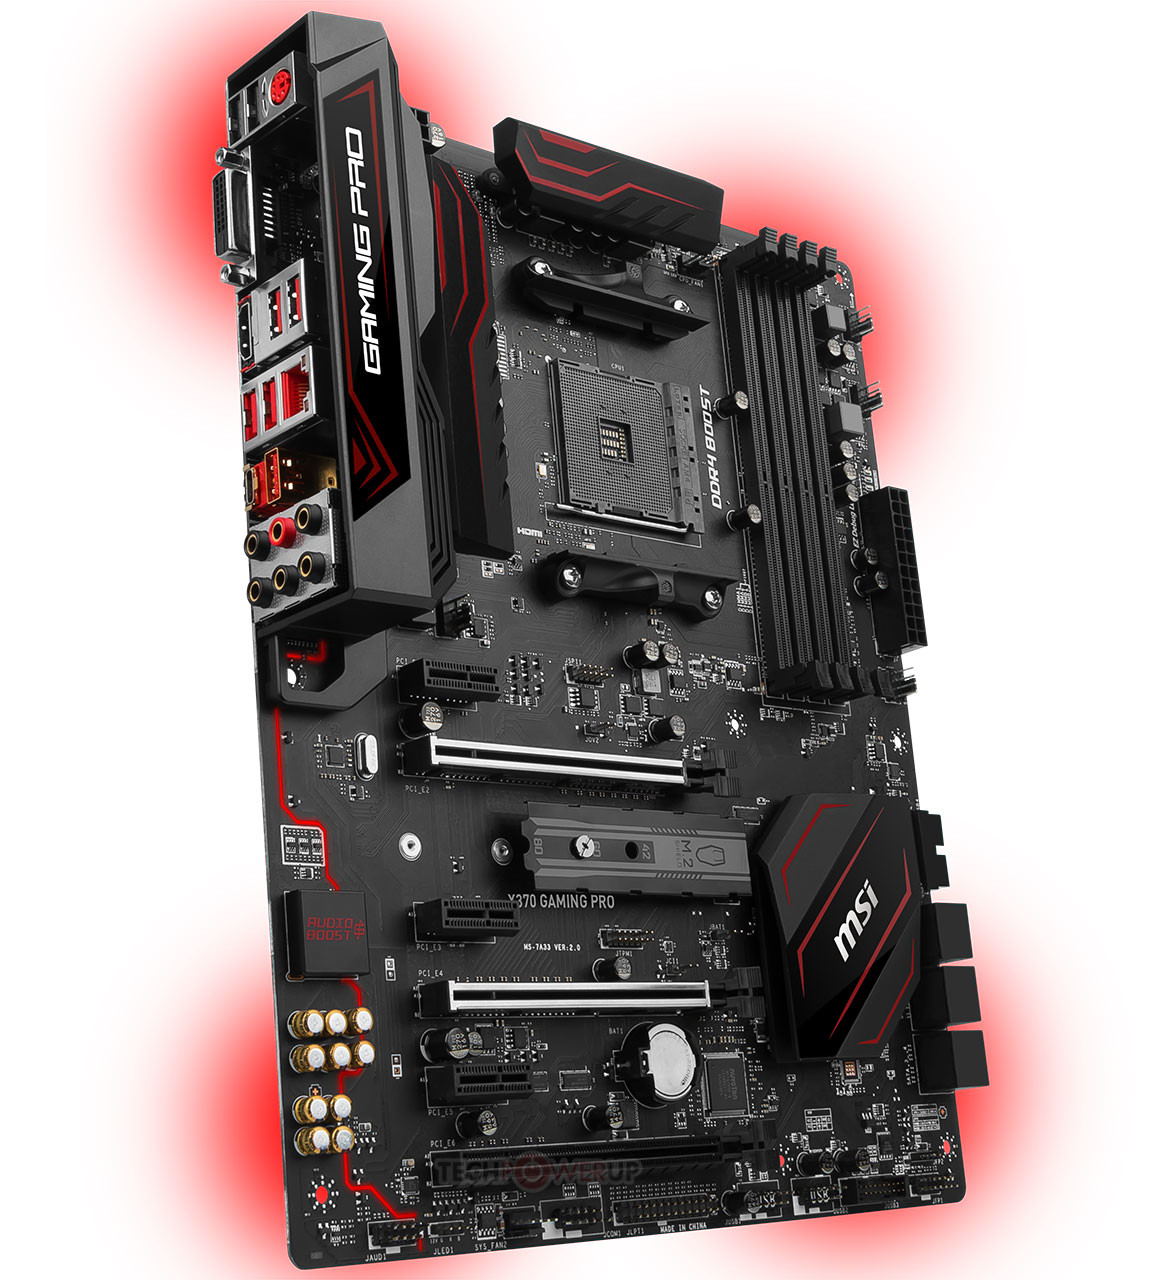 MSI Intros X370 Gaming Pro Socket Motherboard | TechPowerUp